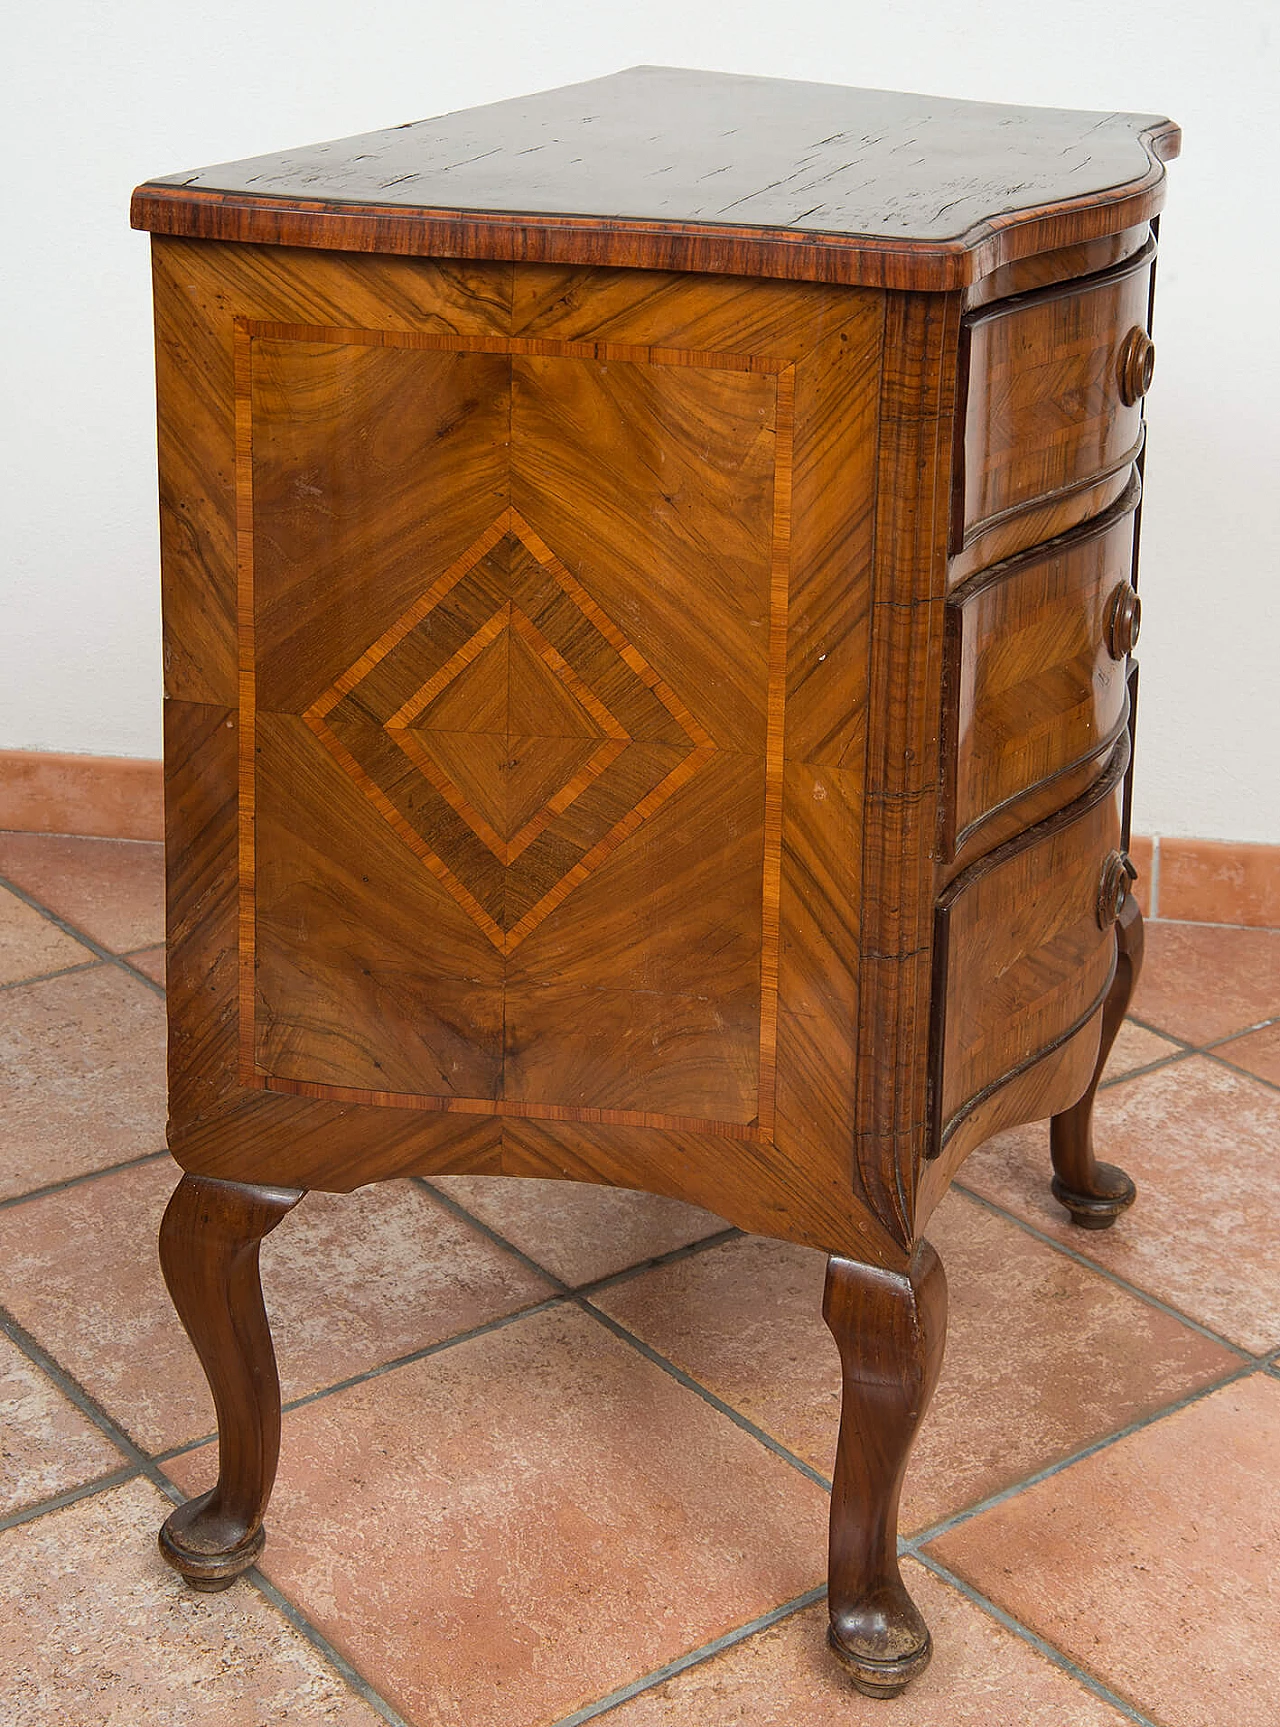 Neapolitan Louis XIV walnut-root bedside table with inlays, 18th century 2